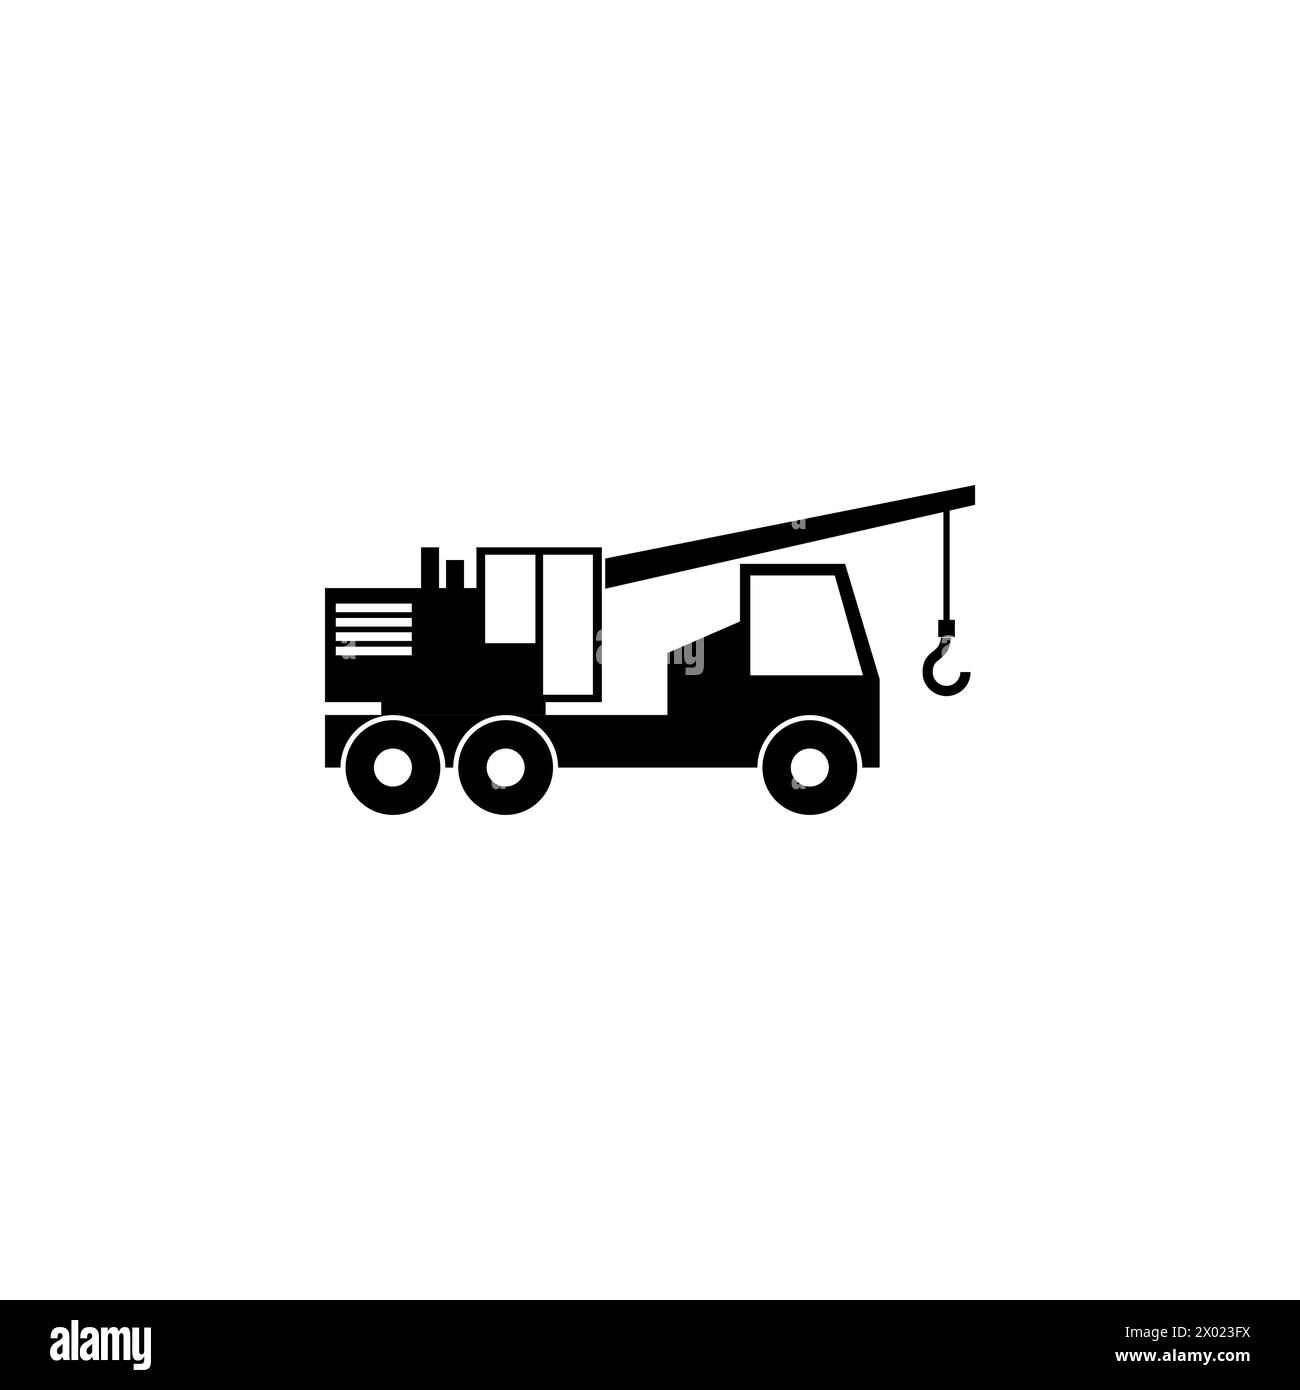 Crane Truck flat vector icon. Simple solid symbol isolated on white background Stock Vector